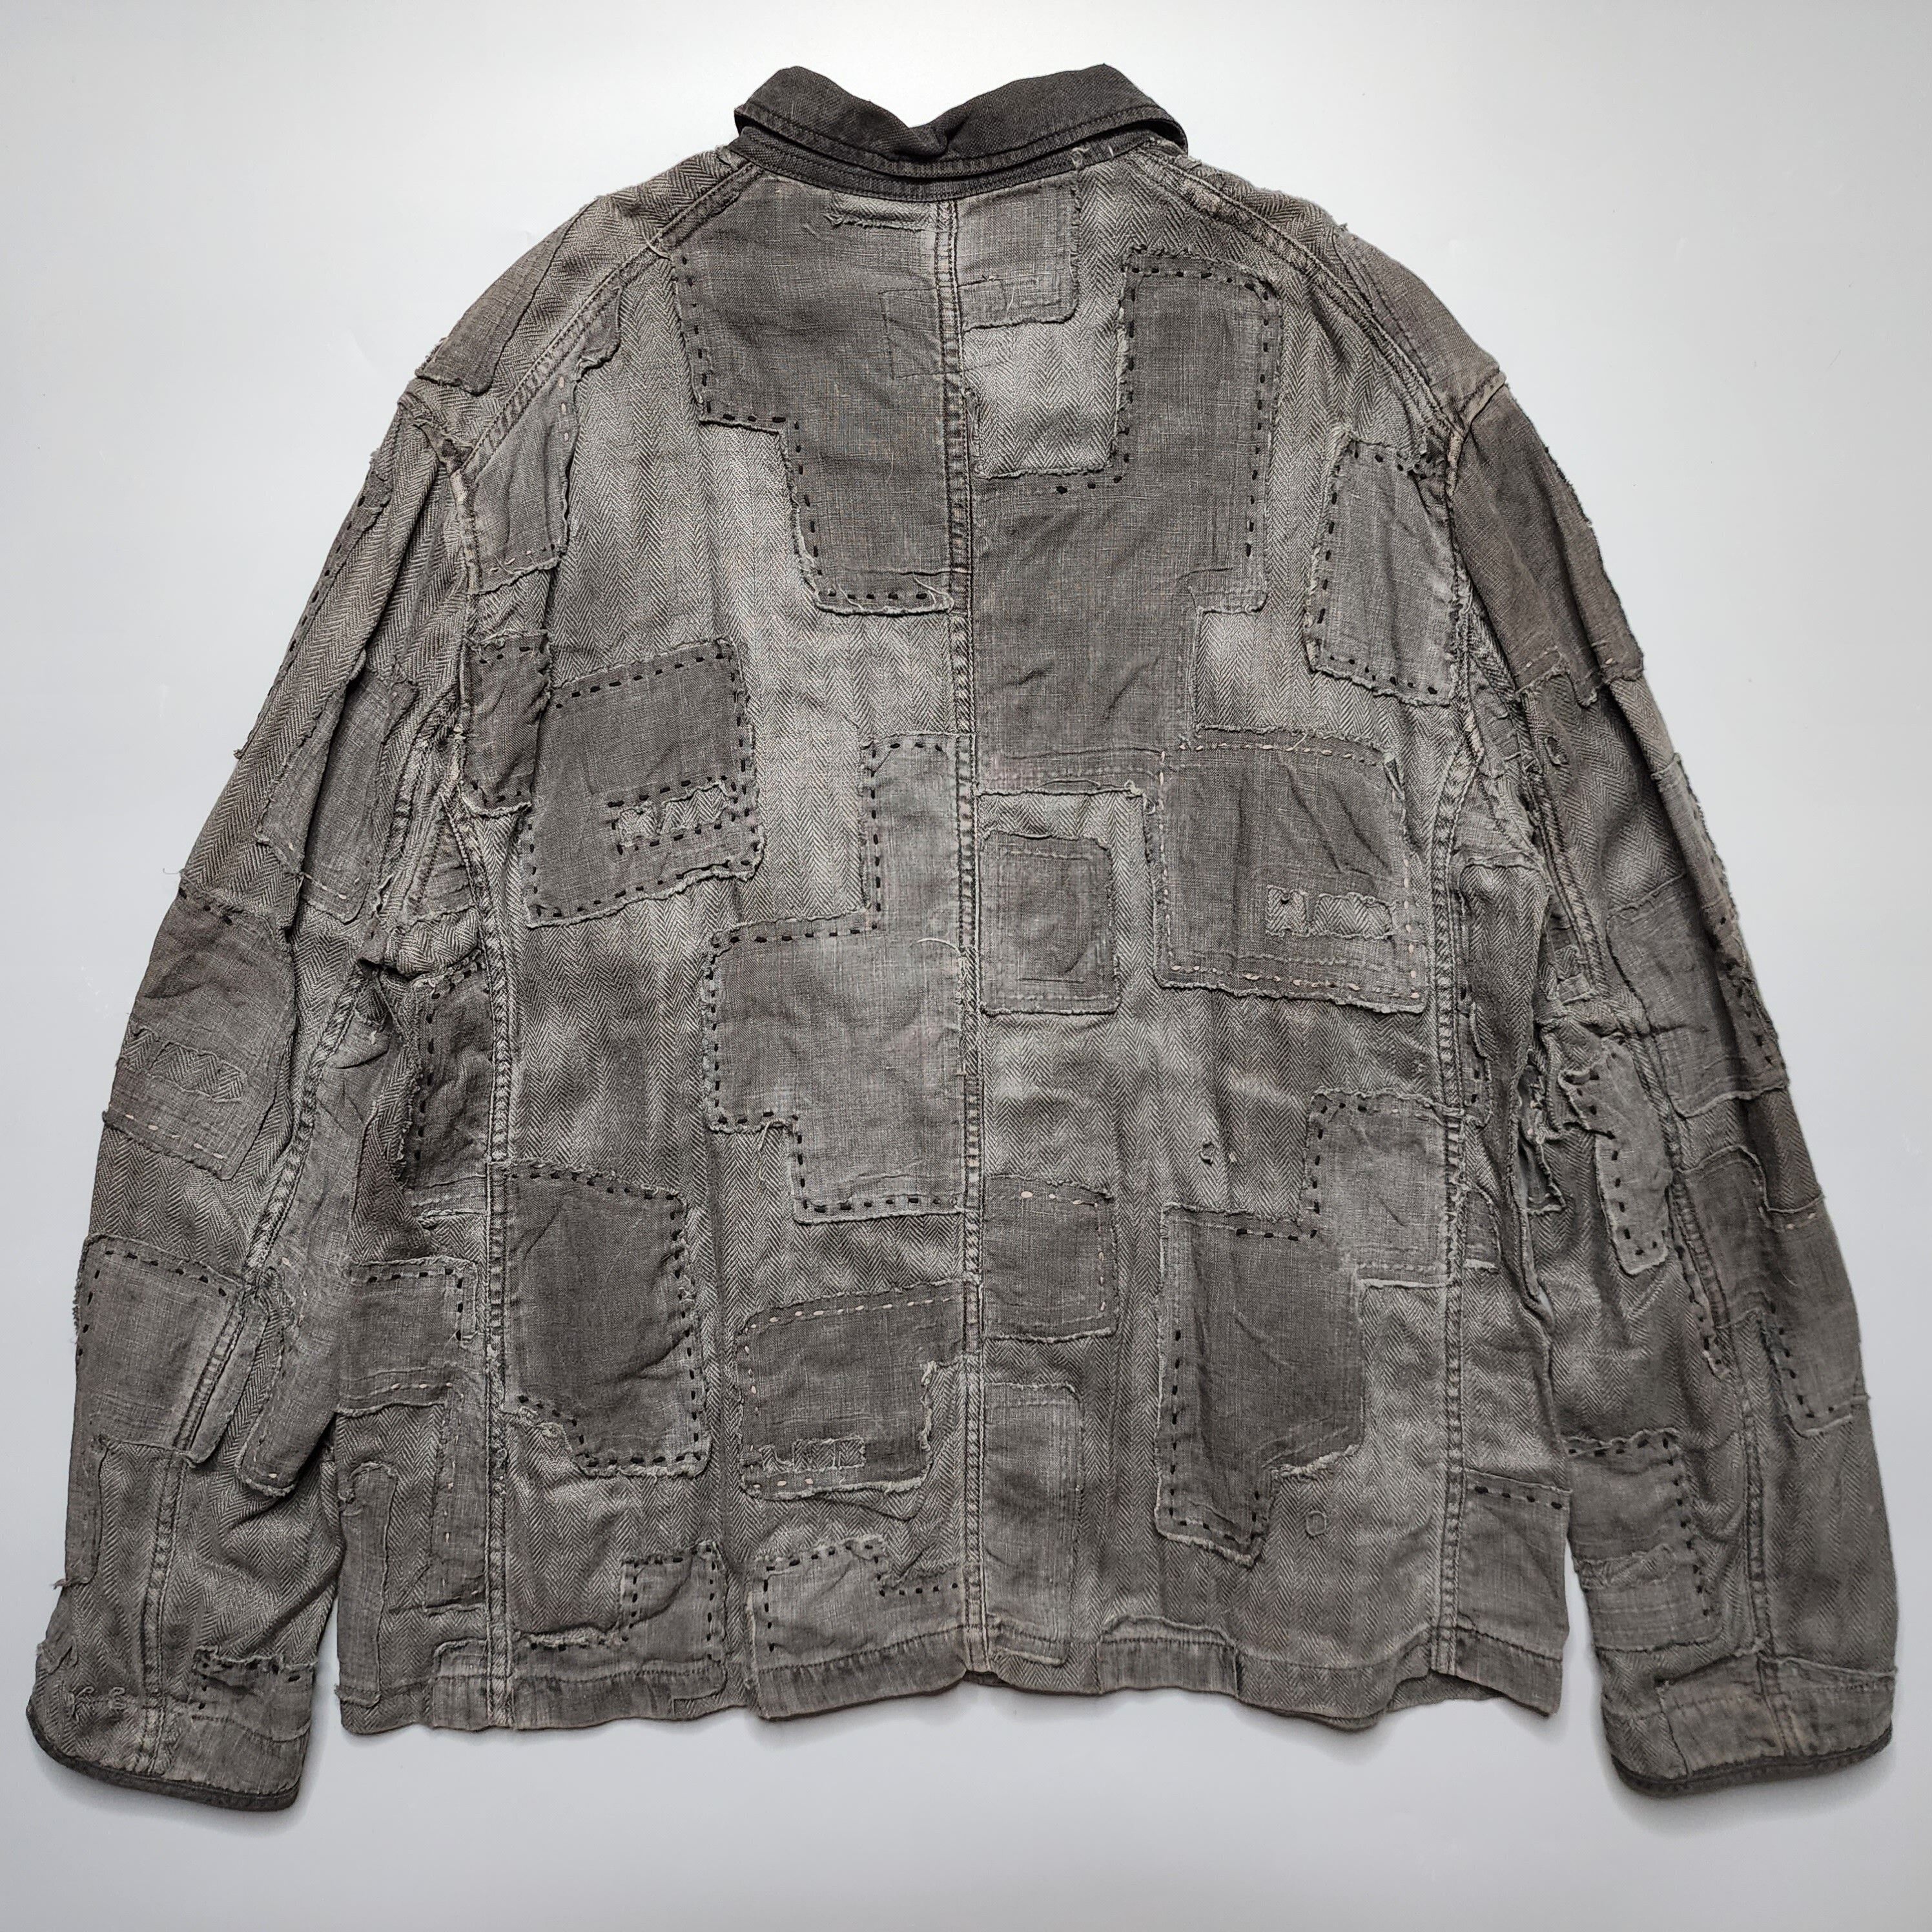 Porter Classic - SS13 Boro Patchwork French Work Jacket - 2